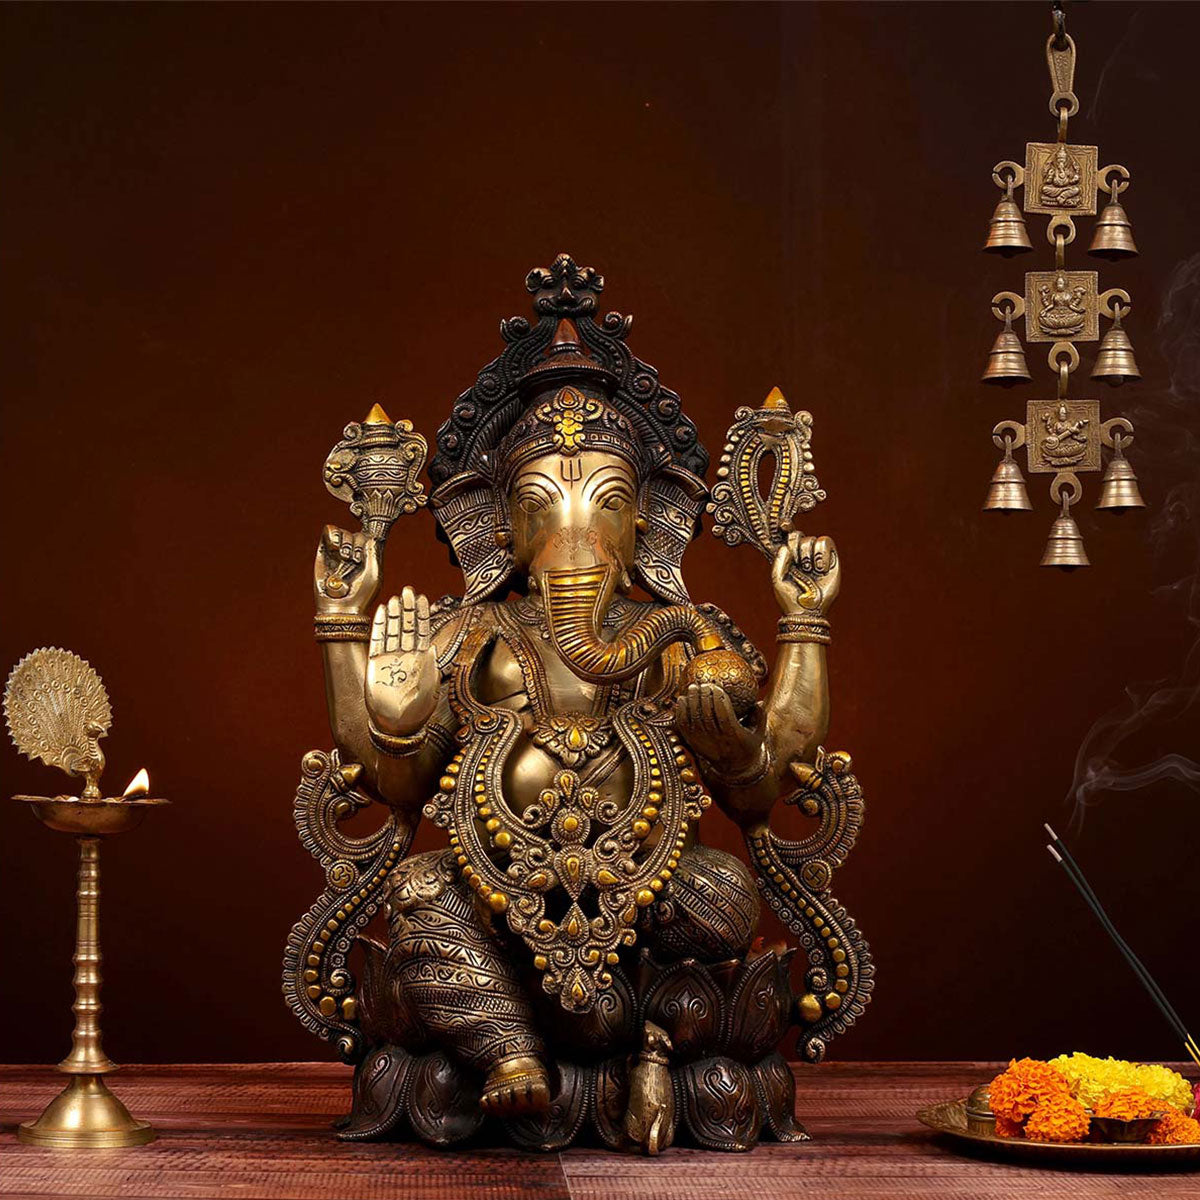 Lord Ganesha in 3 color Tone Idol made of Pure Brass - 13 x 10 x 22 Inch, 21.6 Kg